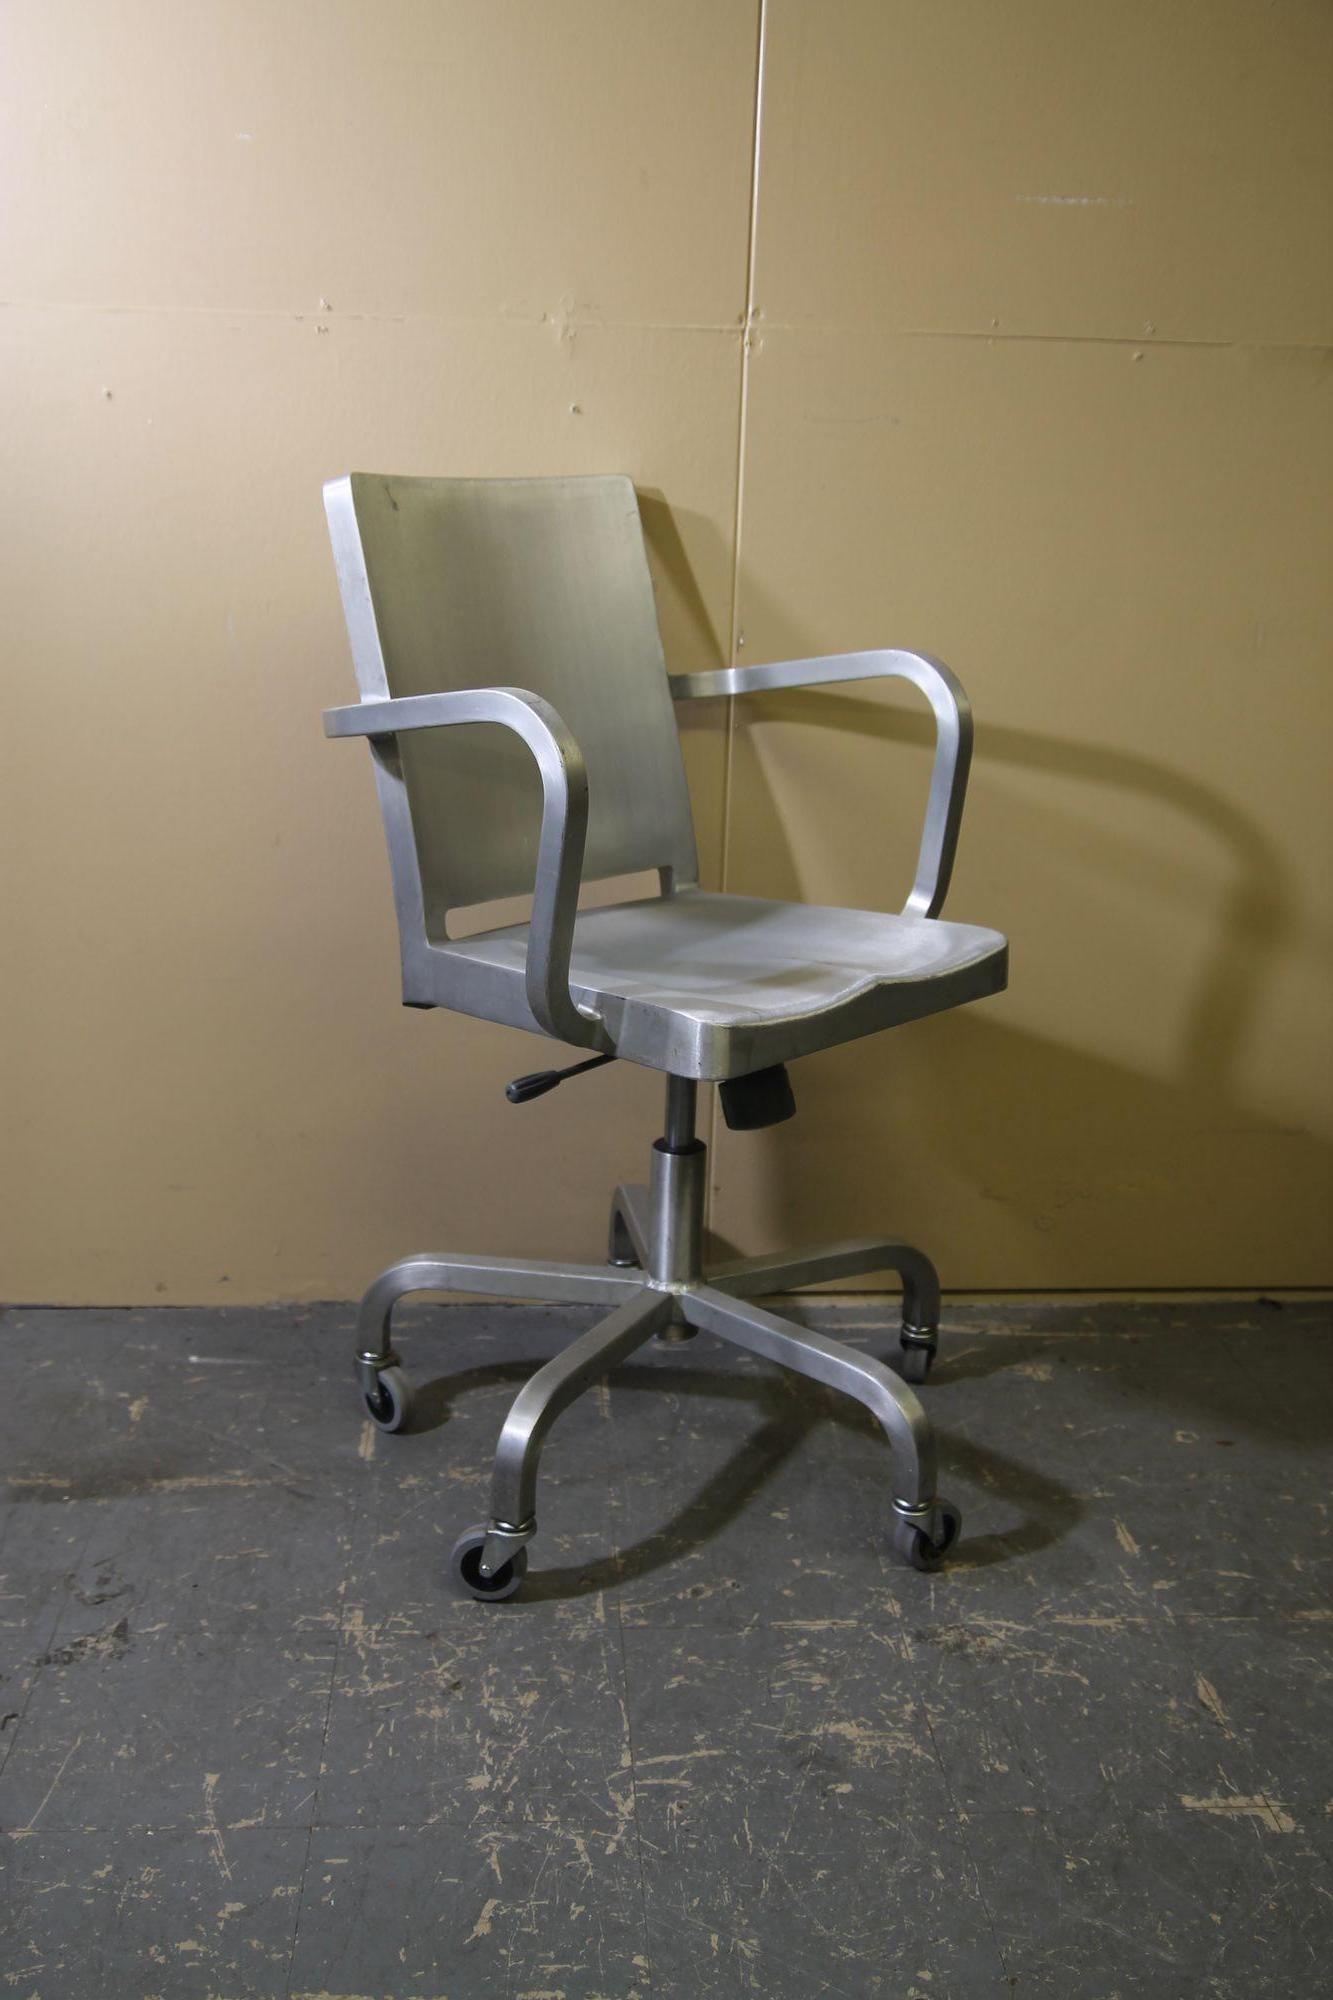 Pleased to offer this great brushed aluminum chair from Emeco. This Starck designed chair sits on 4 wheels. Chair is in nice vintage shape. There are some light scratches as well as a nick on the seat that is noted in my photos.